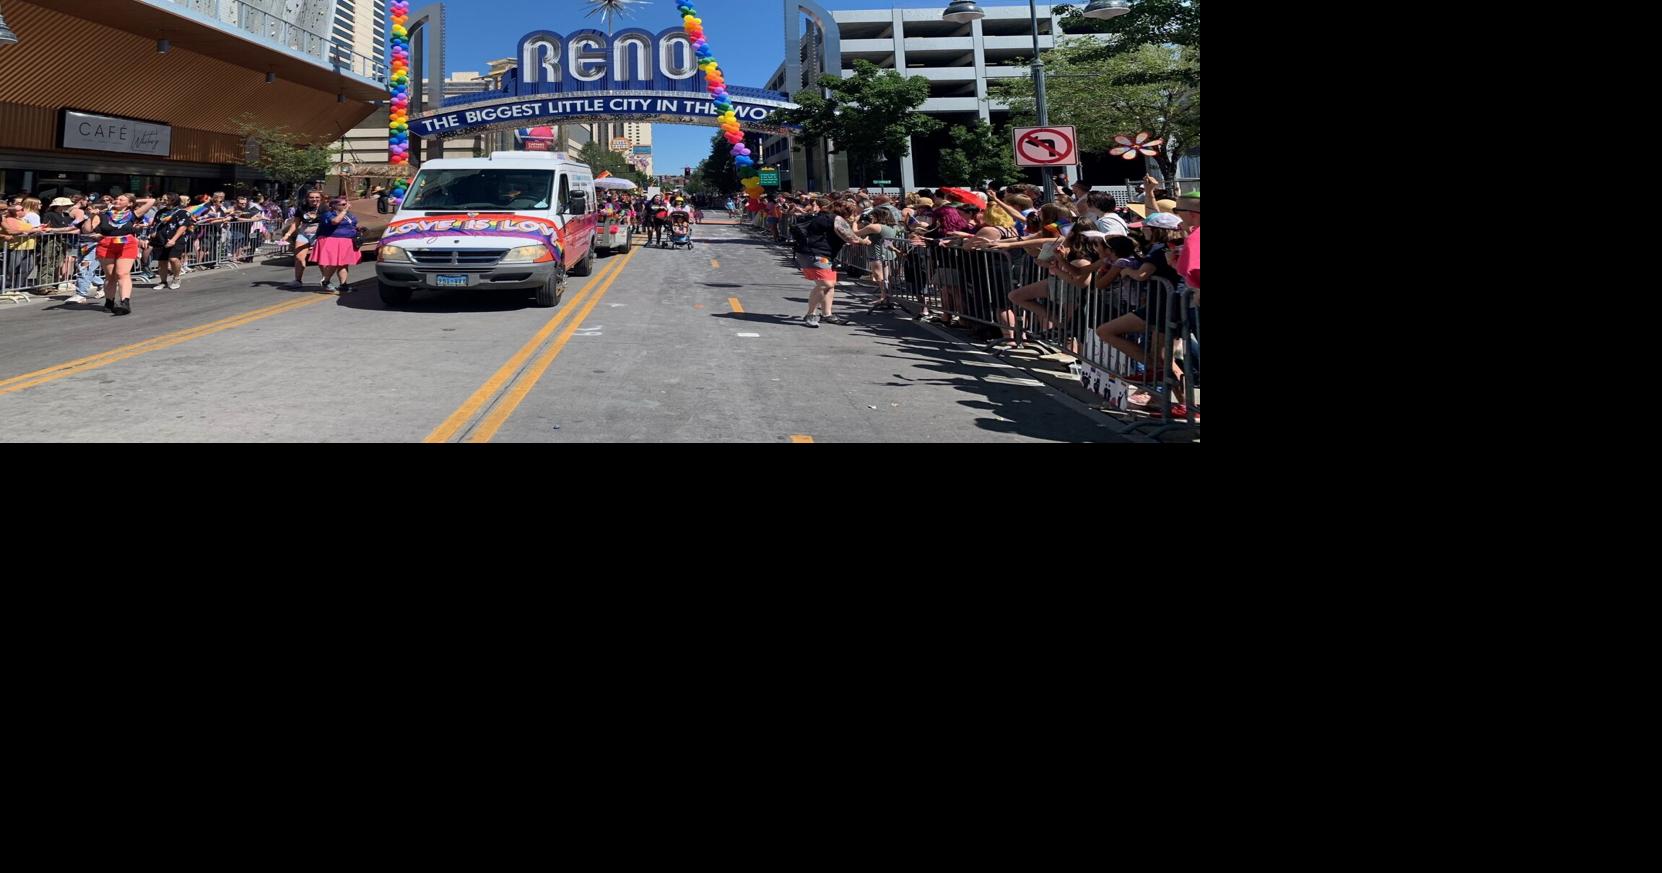 Northern Nevada’s Pride Festival Kicks Off with a Parade